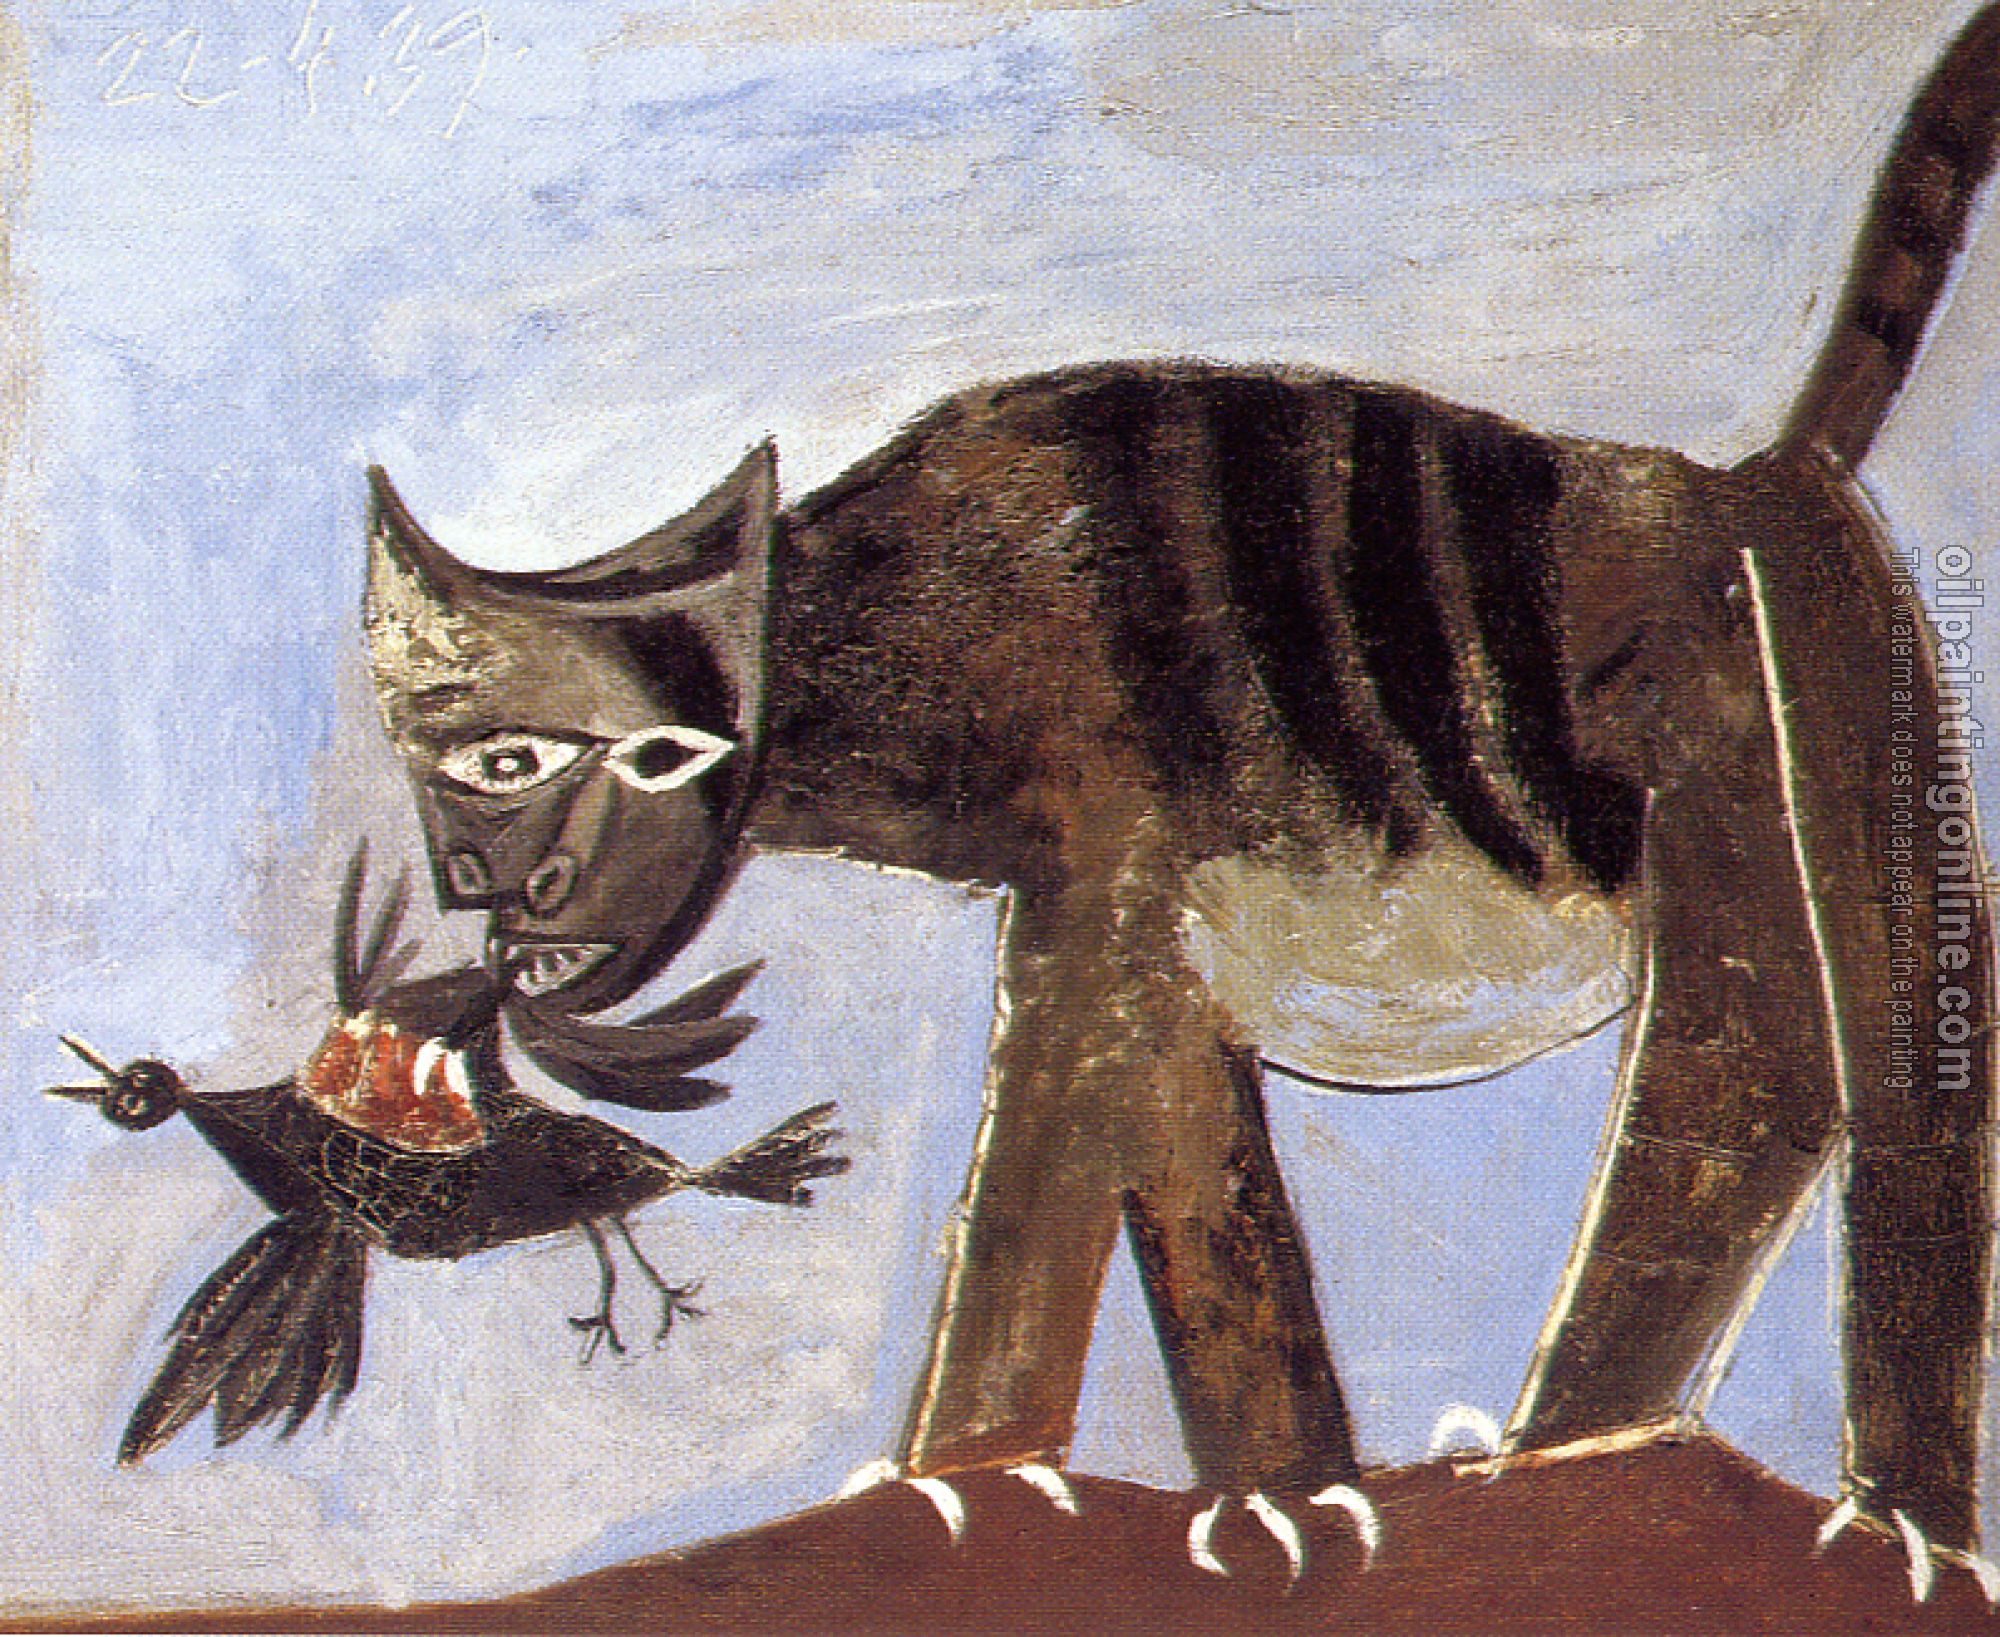 Picasso, Pablo - cat catching a bird